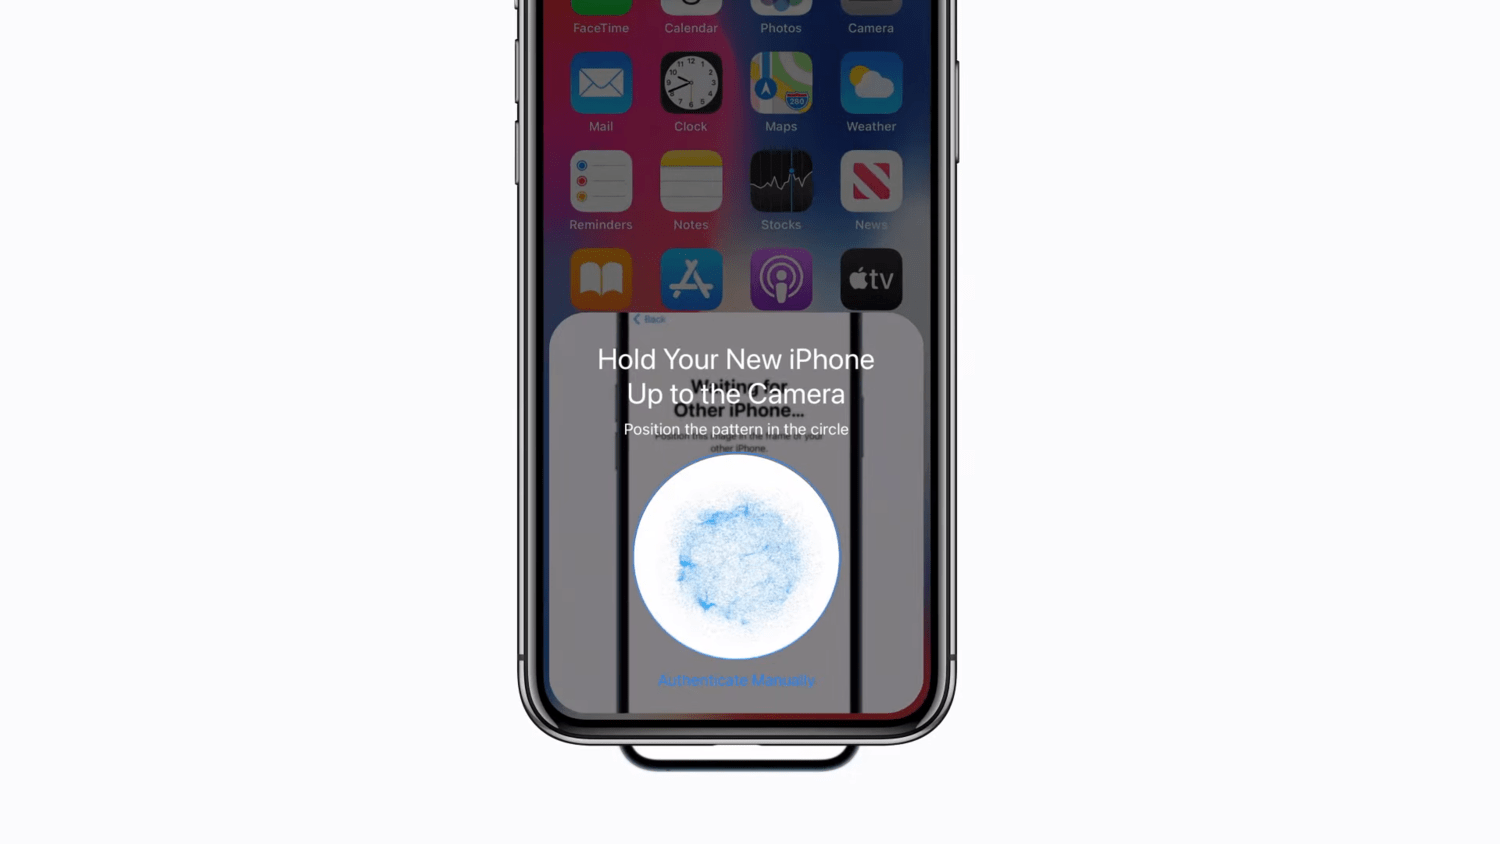 Scan the Animation on New iPhone with Old iPhone